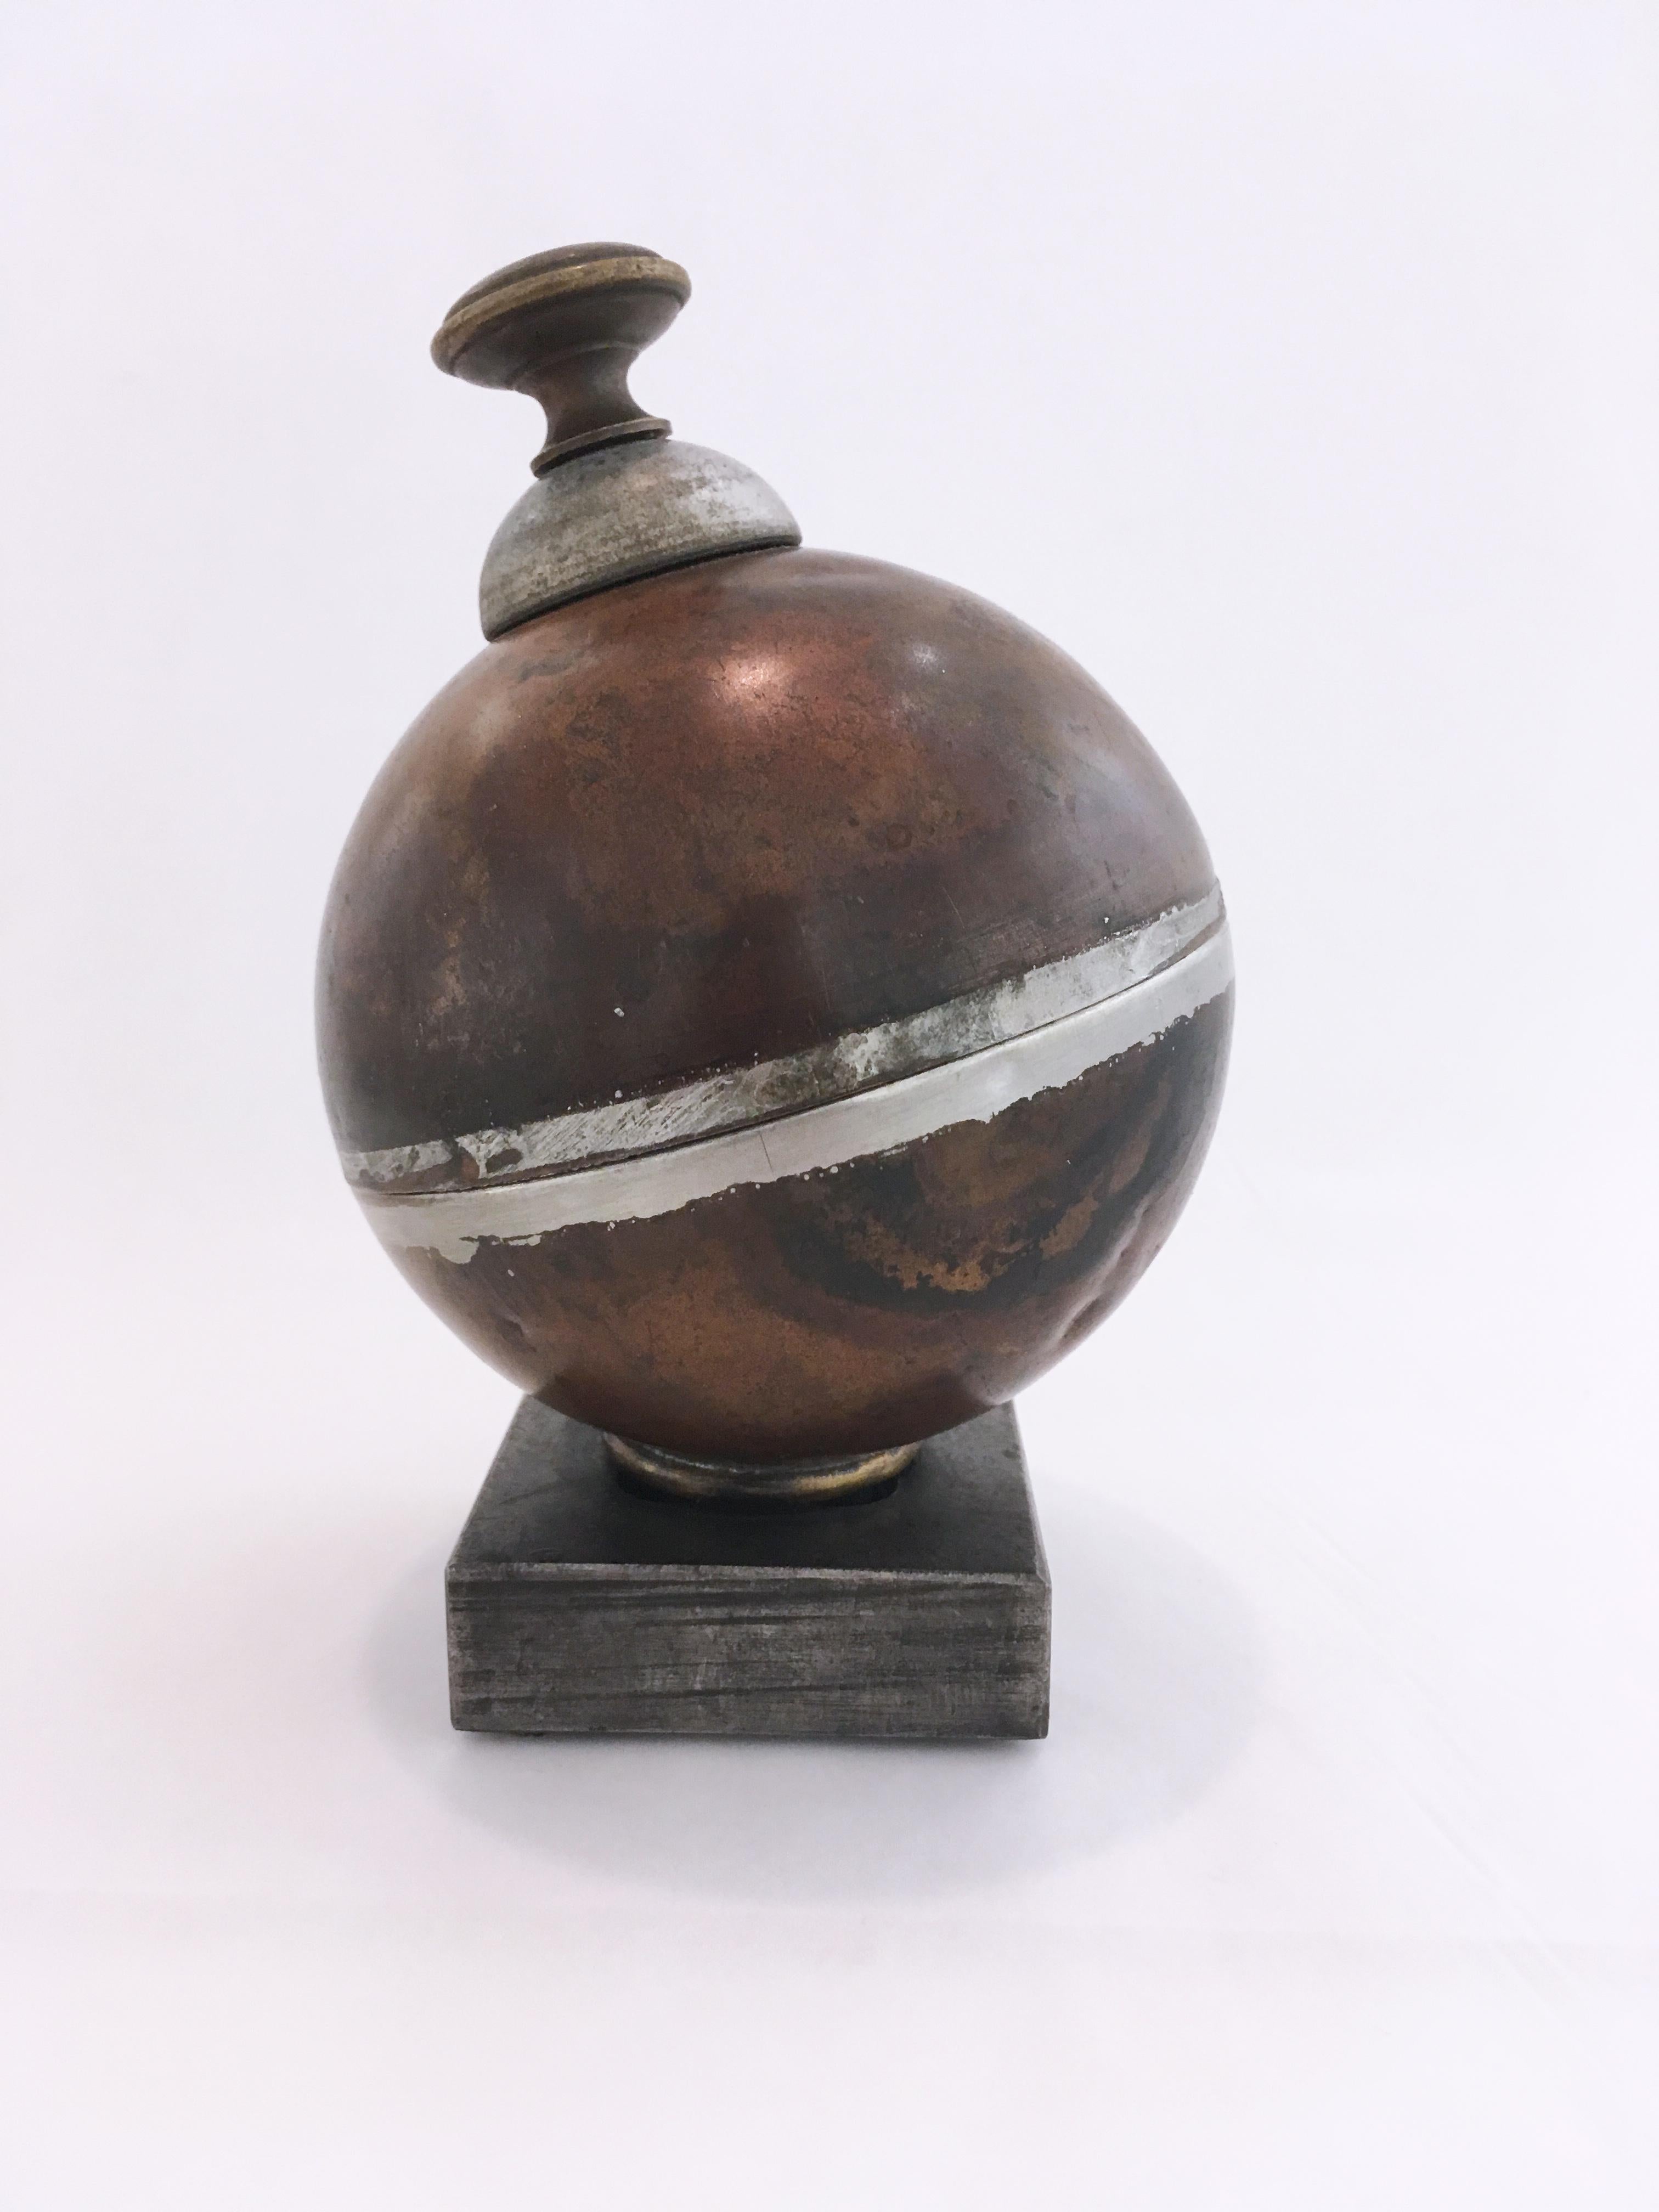 Float Stash, steel, brass, bone, found object, sculpture, sphere, abstract - Sculpture by C. T. Bray